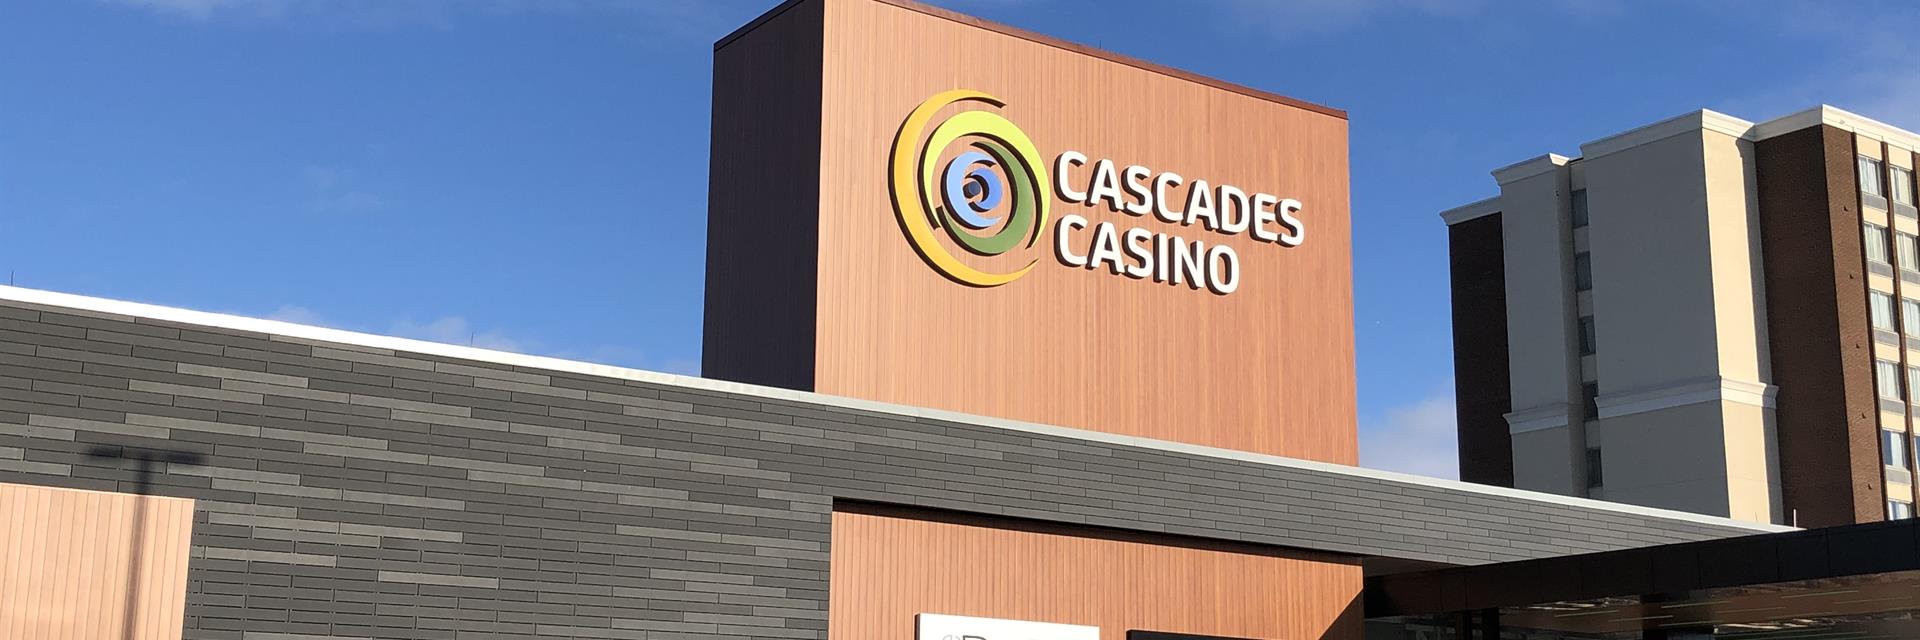 panoramic view of the chatham cascades casino entrance